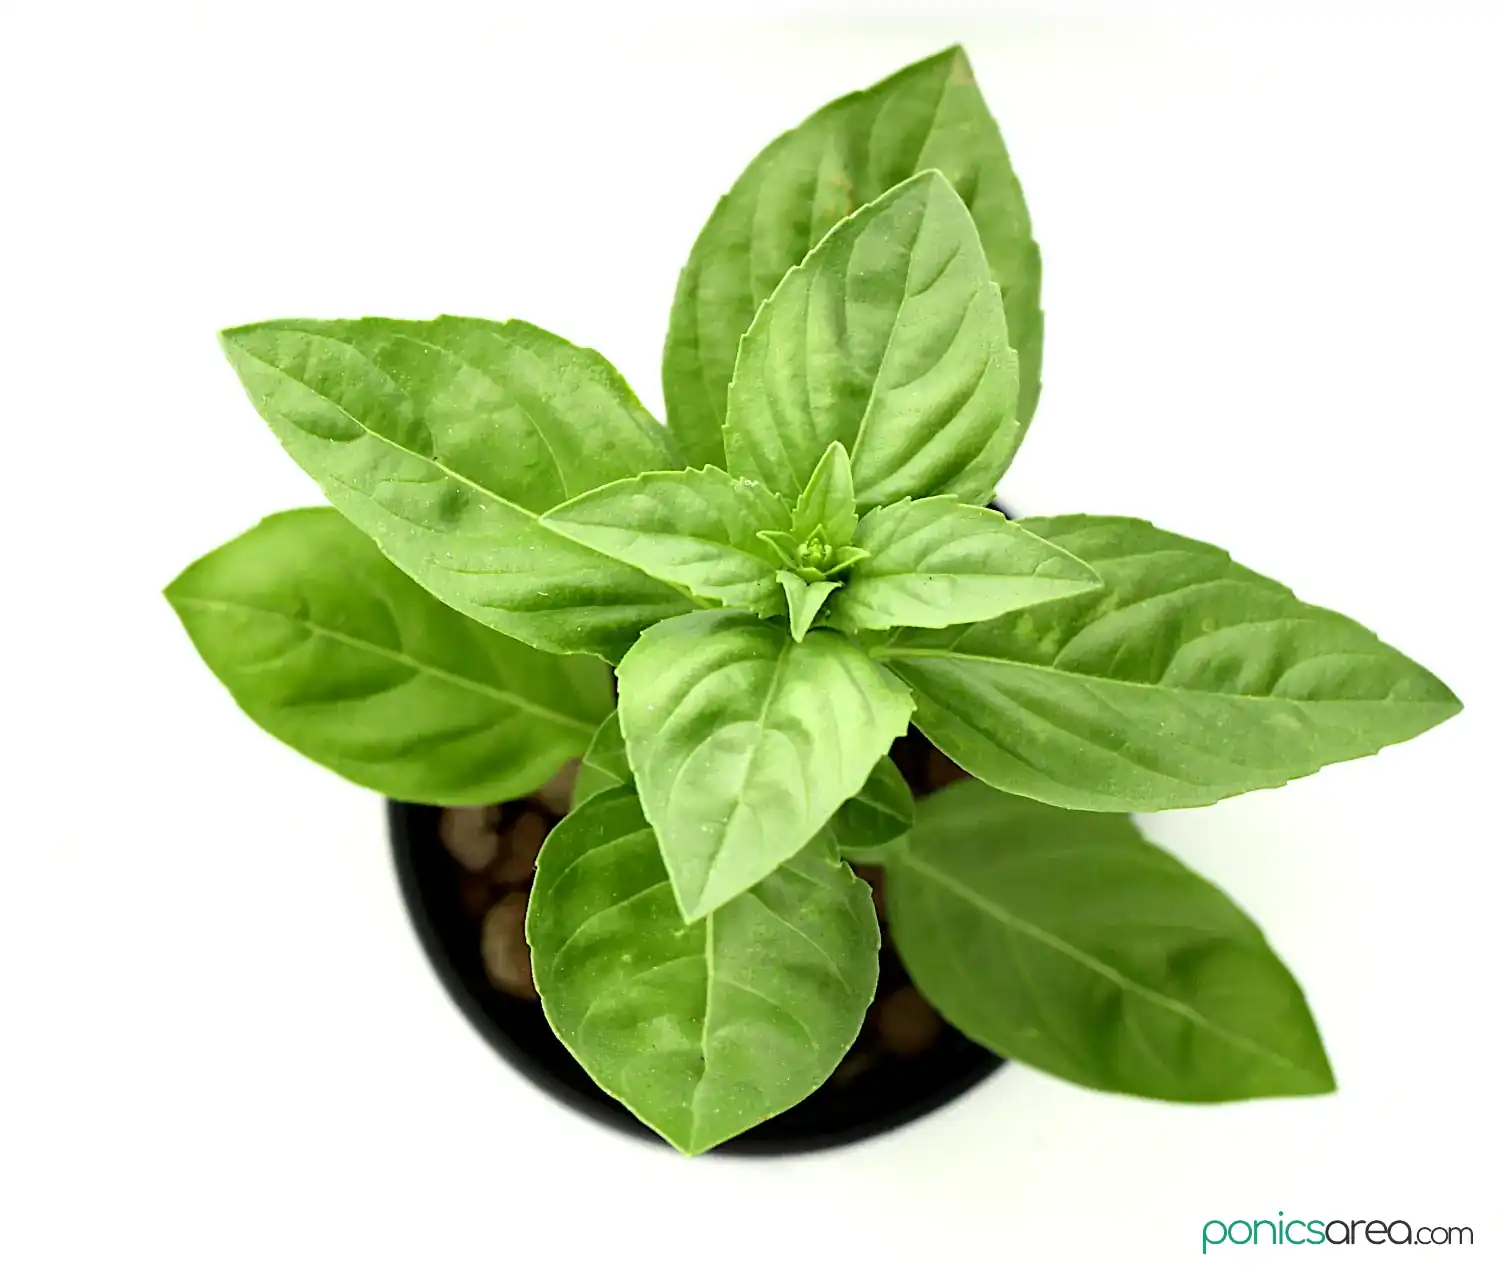 DIY hydroponic system for growing basil